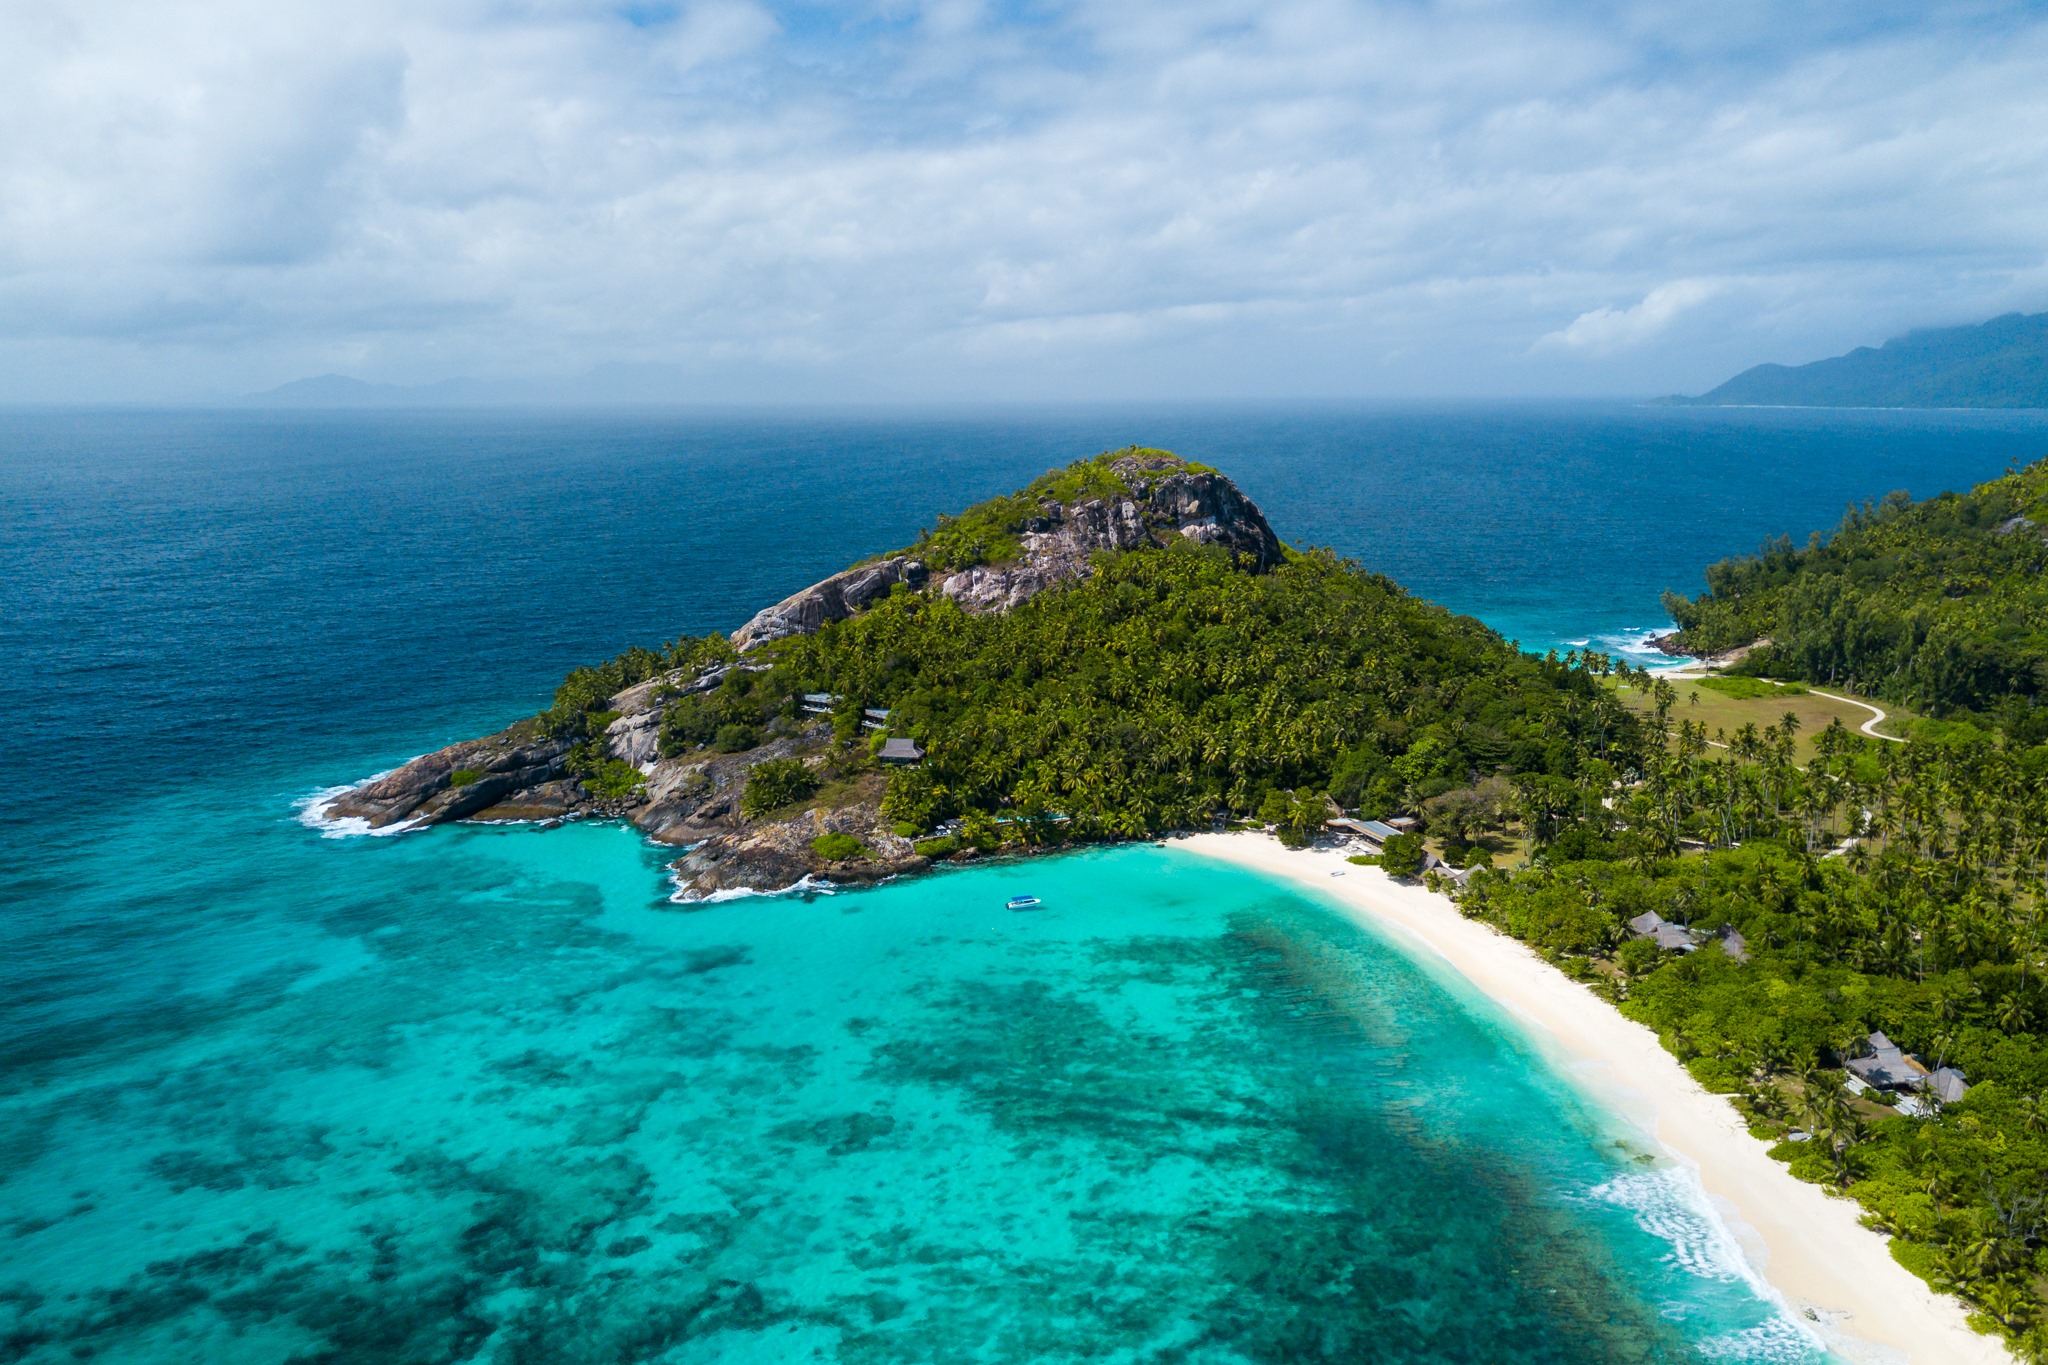 Nick Walton travels to the former pirate lair of the Seychelles, where its rich heritage, colourful history and pristine beaches have made it one of the most sought after destinations in the world.